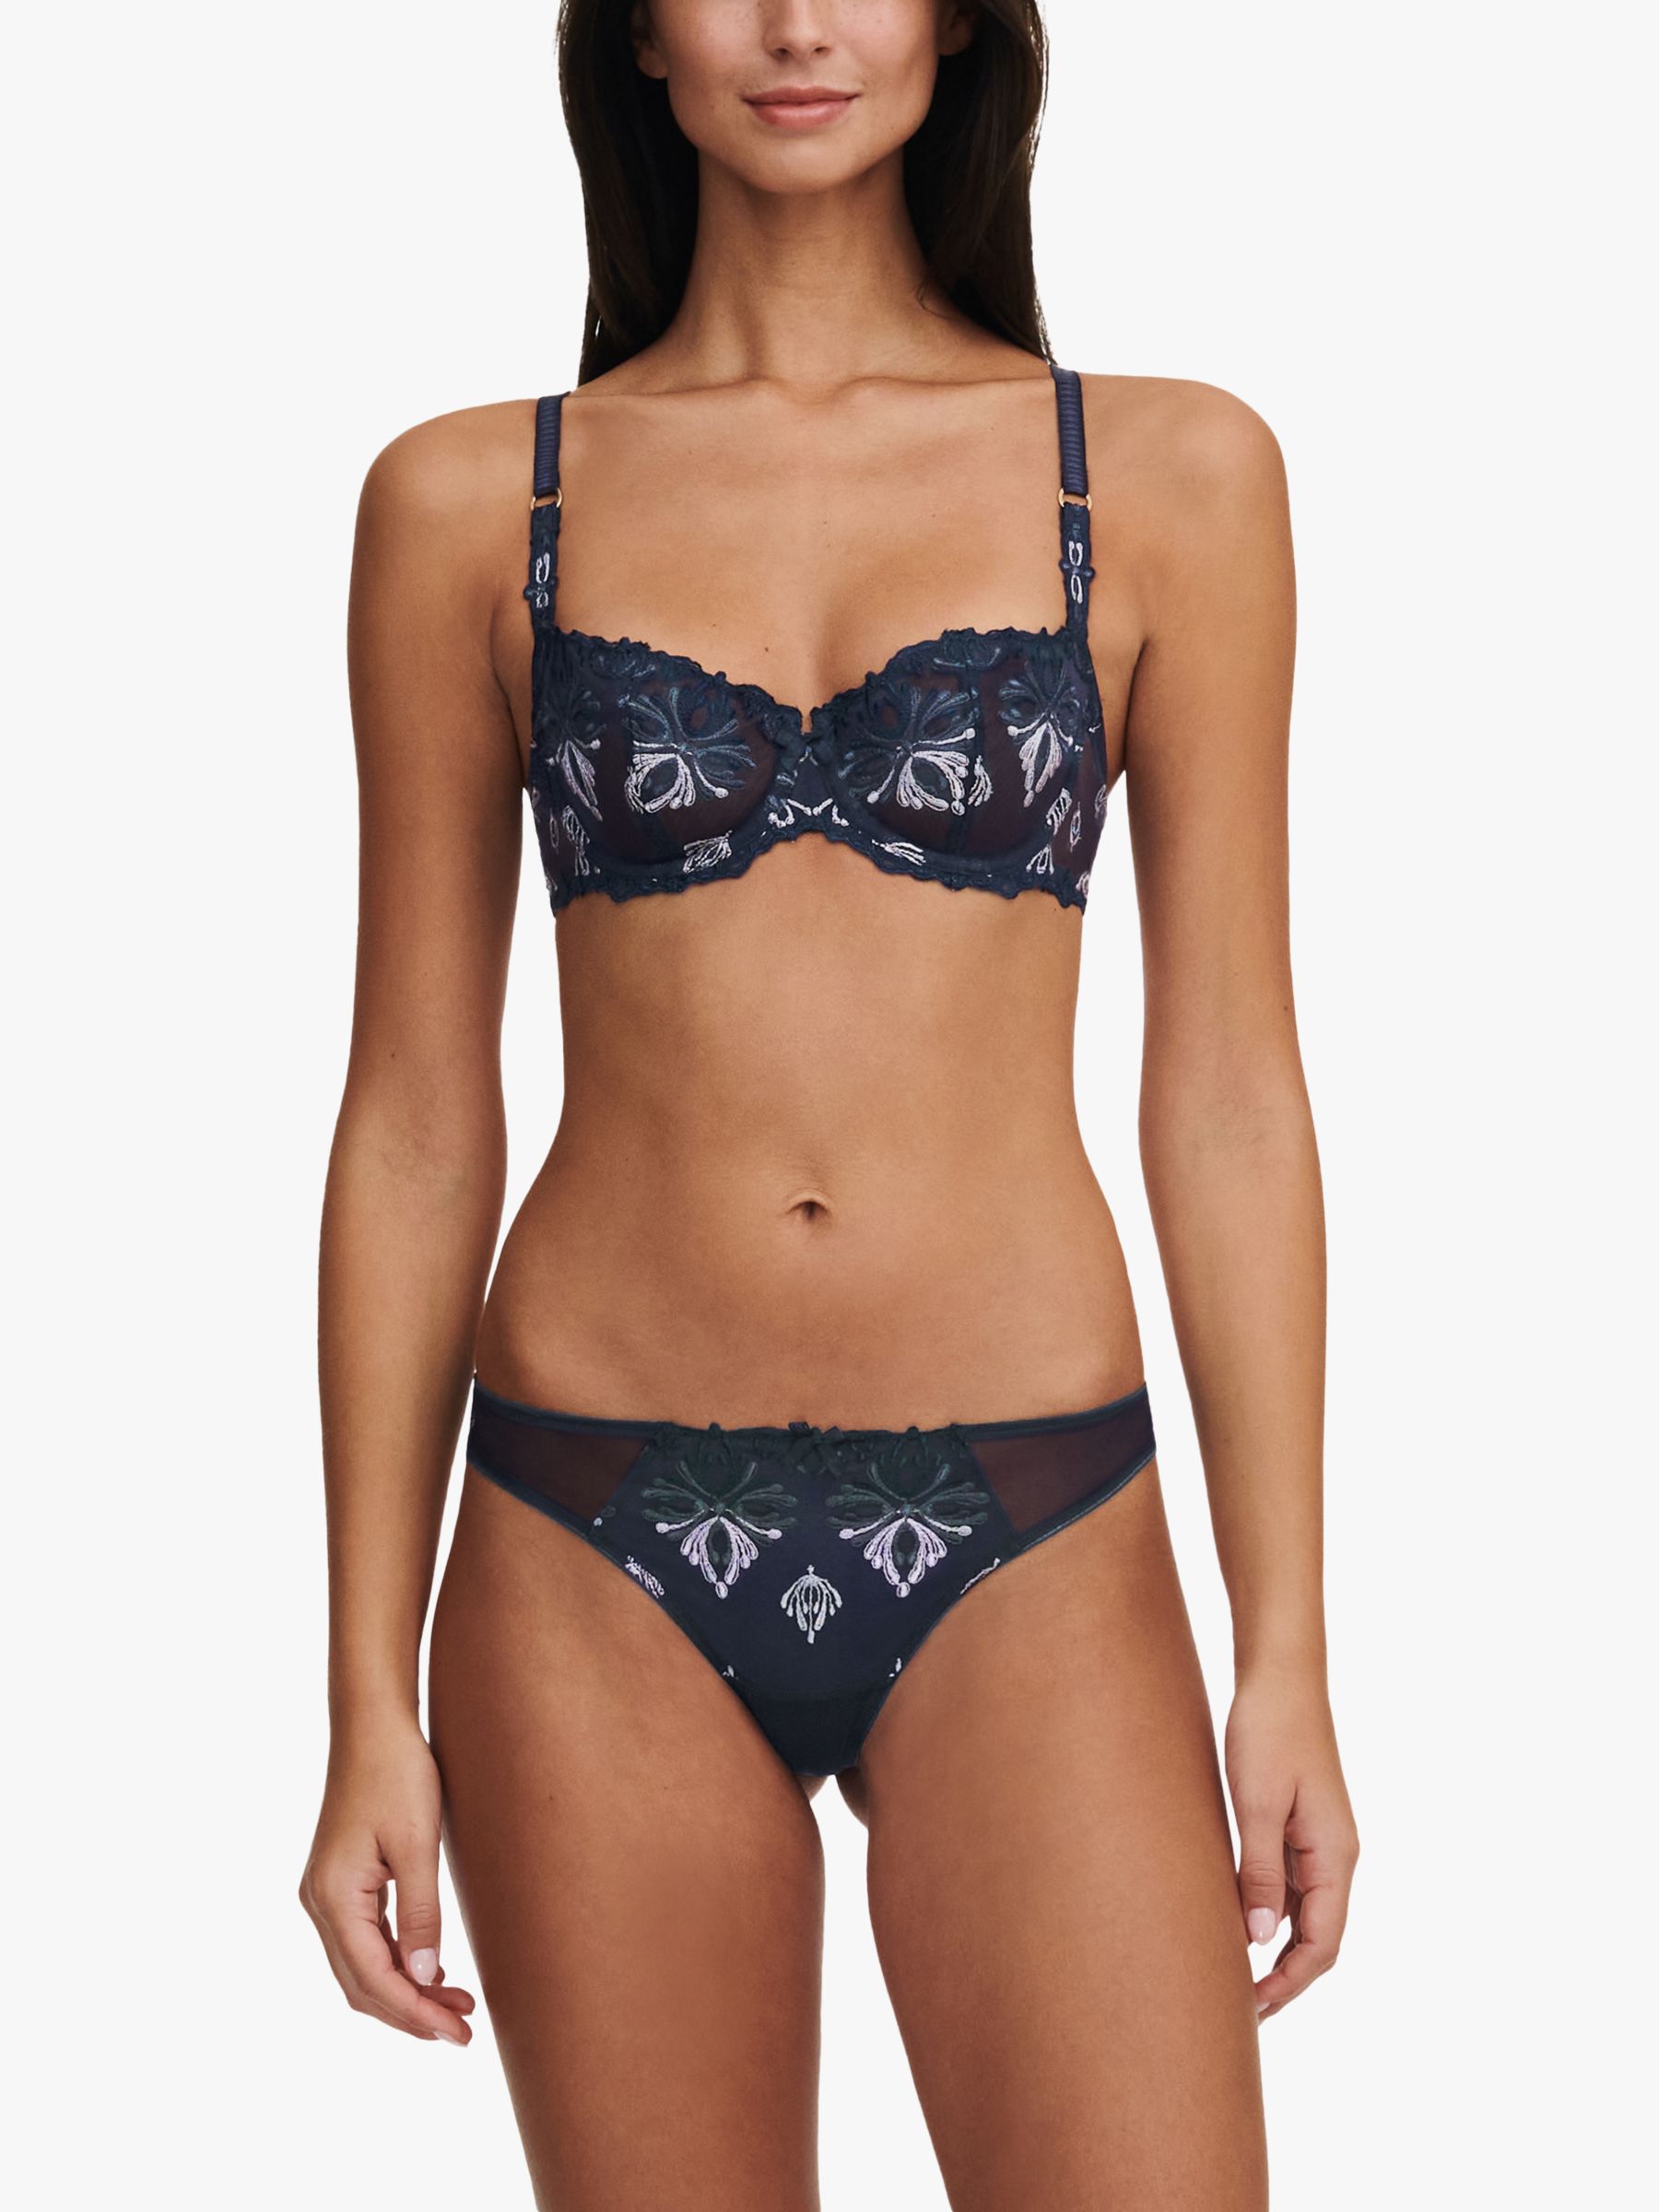 Chantelle Champs Elysees Tanga Knickers, Seabourne at John Lewis